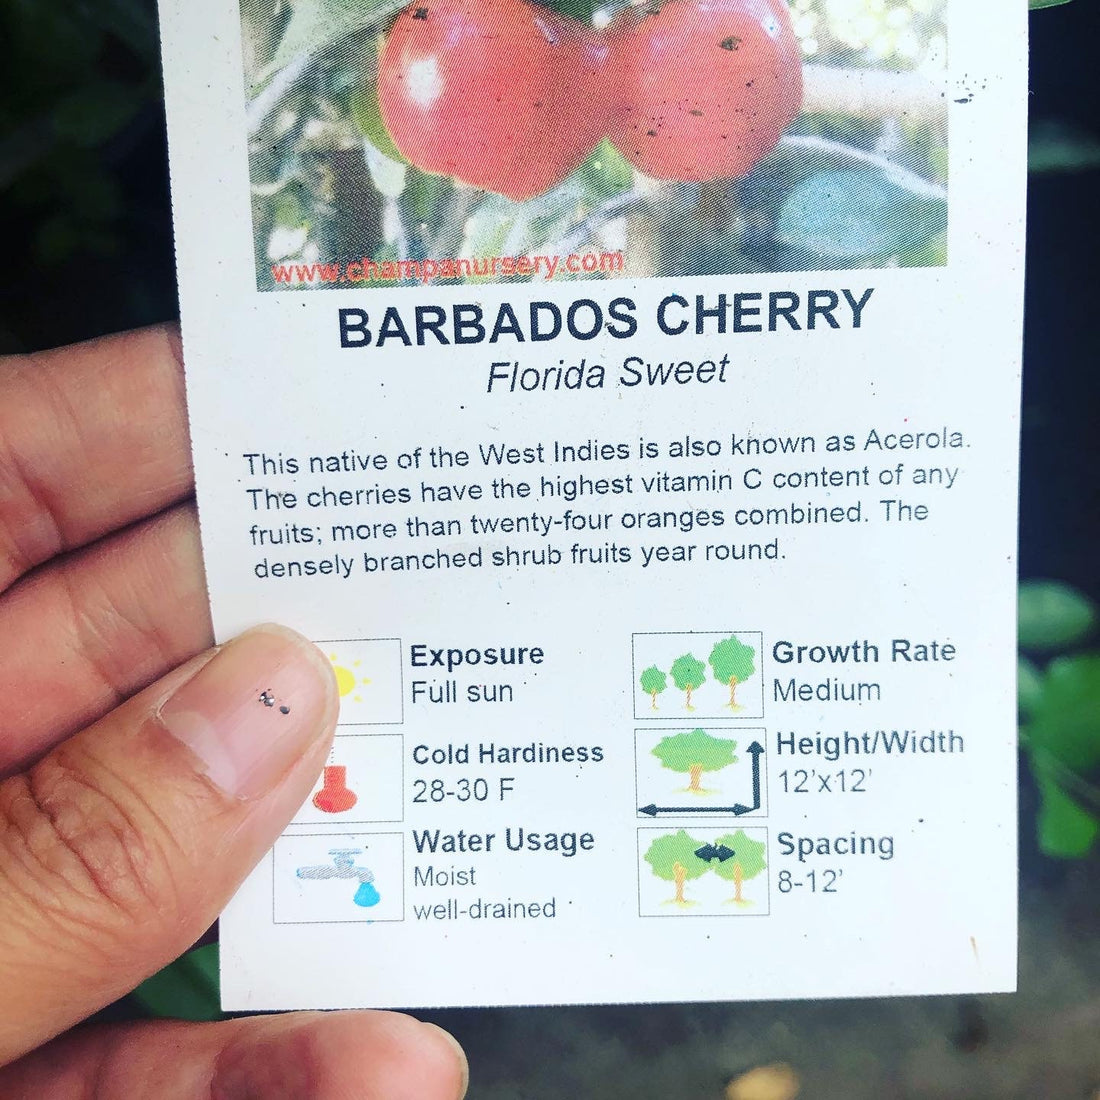 XL -Fruiting size in 3 gallon potted exotic fruit -Barbados Cherry 4-5 ft tall -Acerola